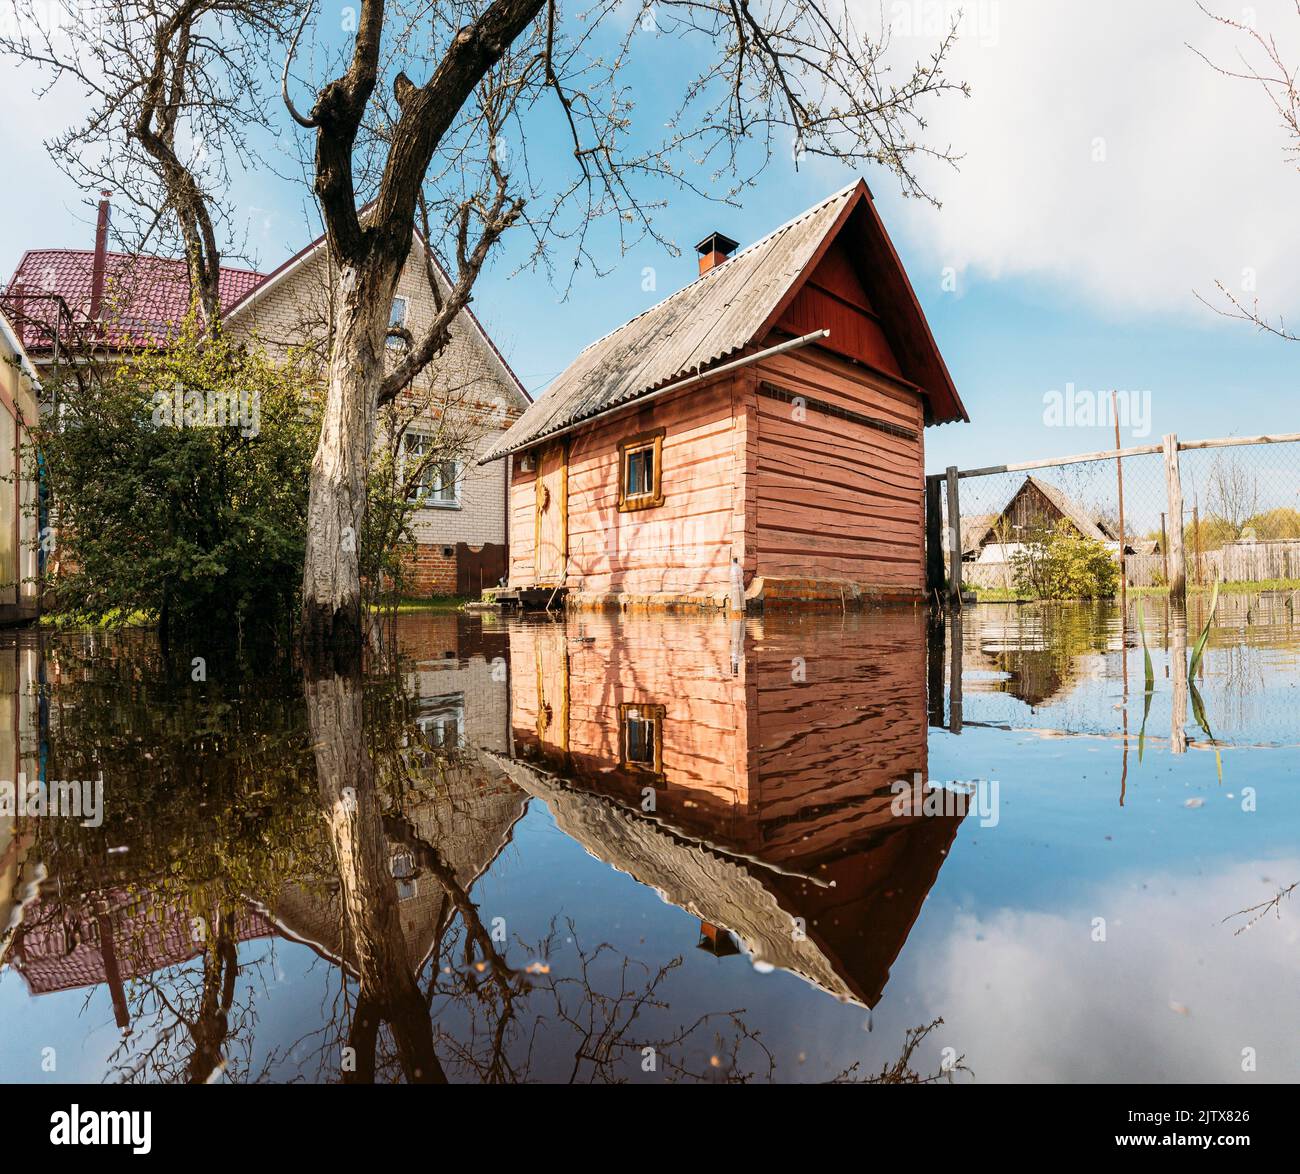 Old wooden Sauna bath building In Water During Spring Flood floodwaters during natural disaster. Water deluge During A Spring Flood. inundation River. Stock Photo